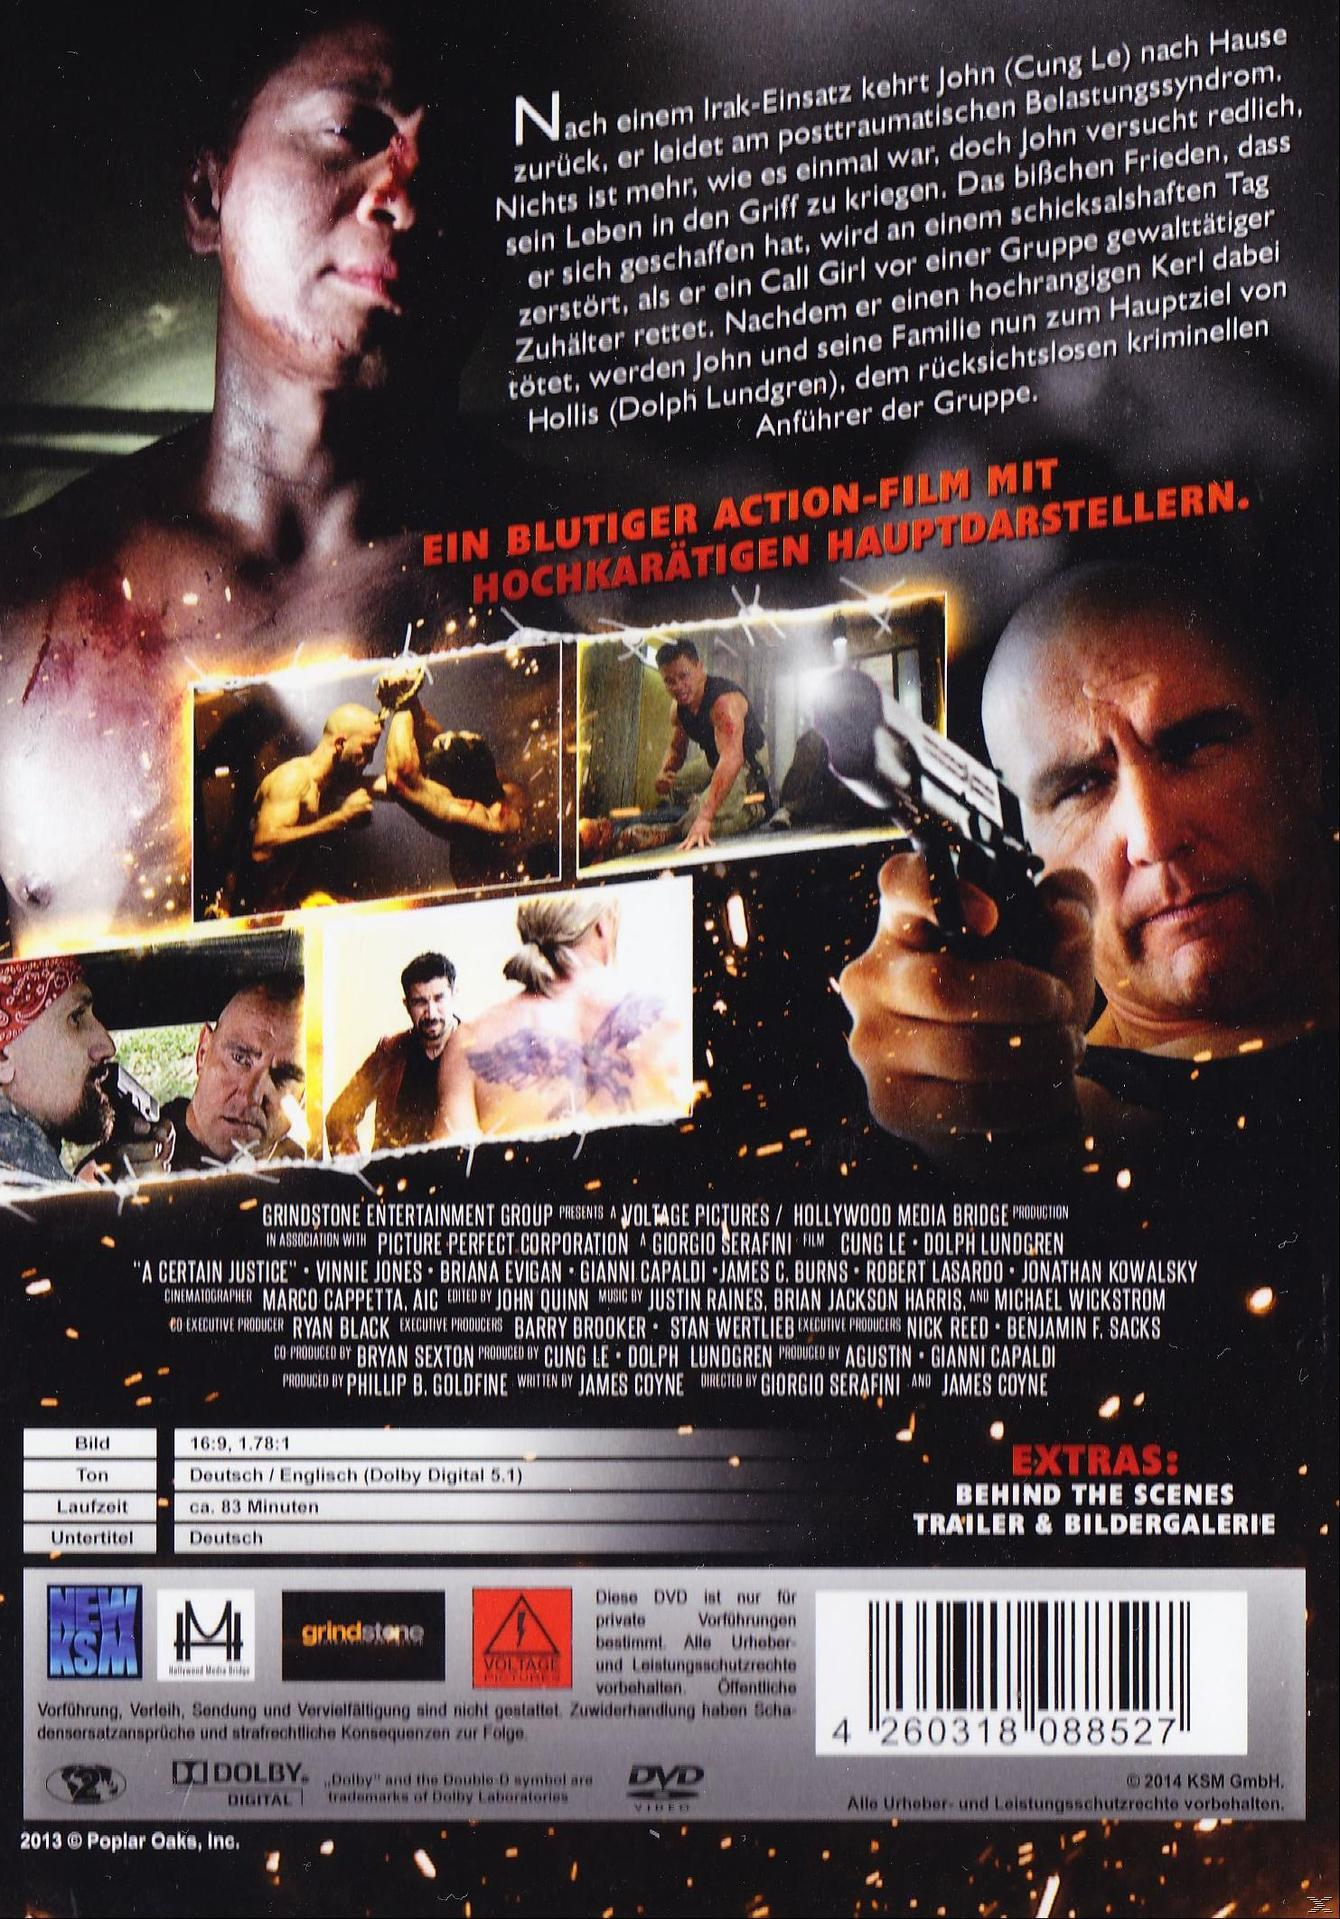 or Lethal be killed Punisher Kill DVD -